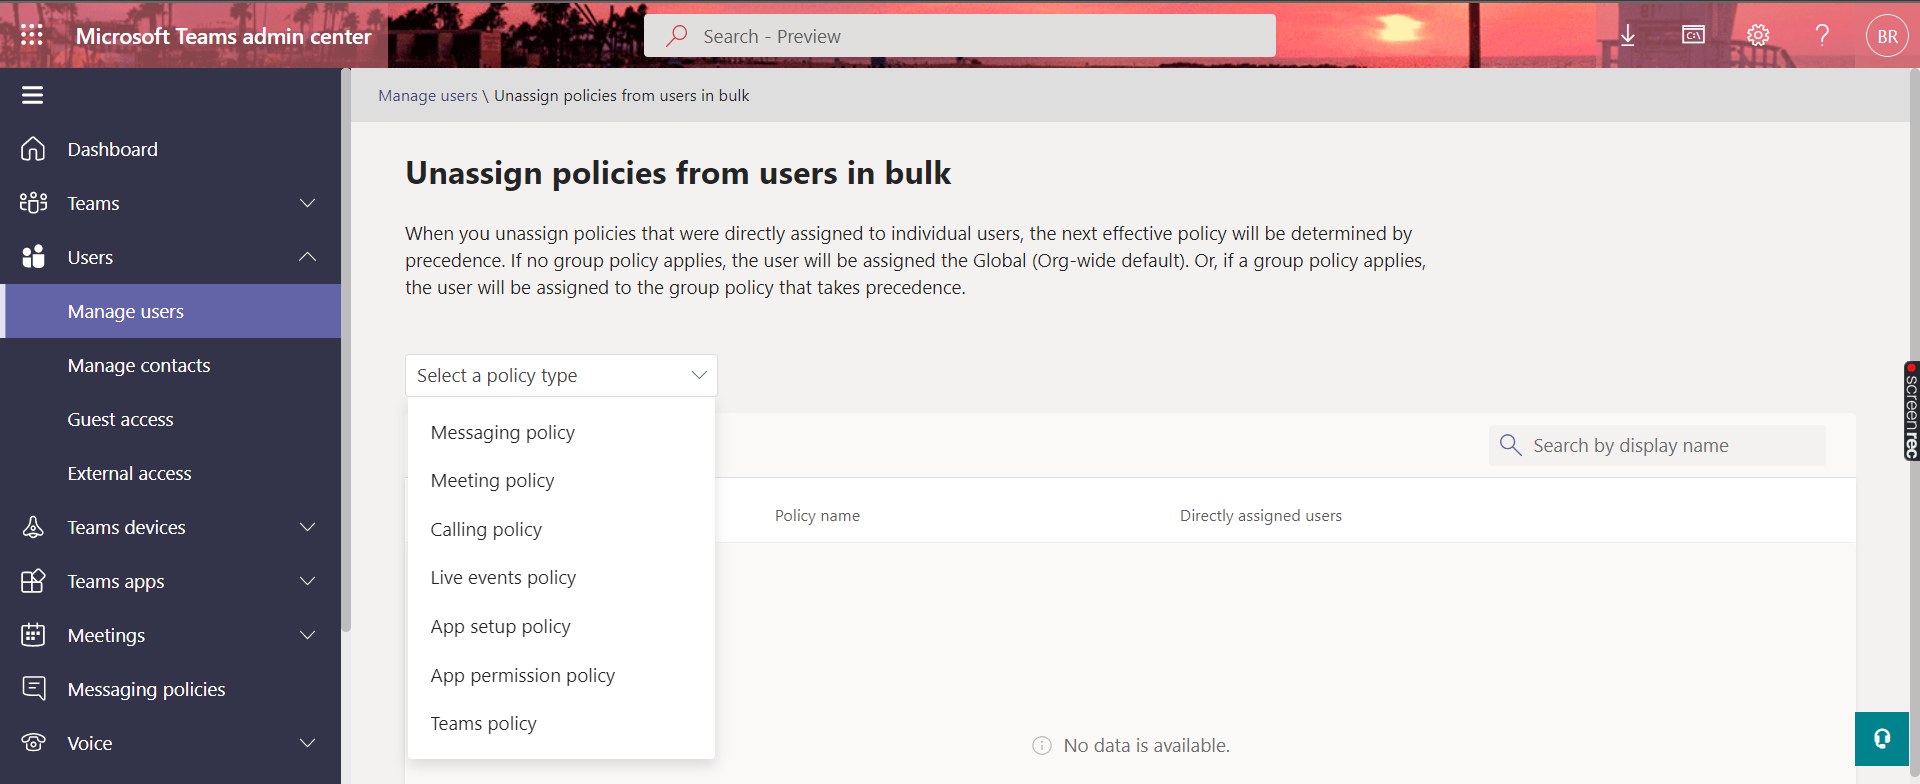 Unassign policies from users in bulk